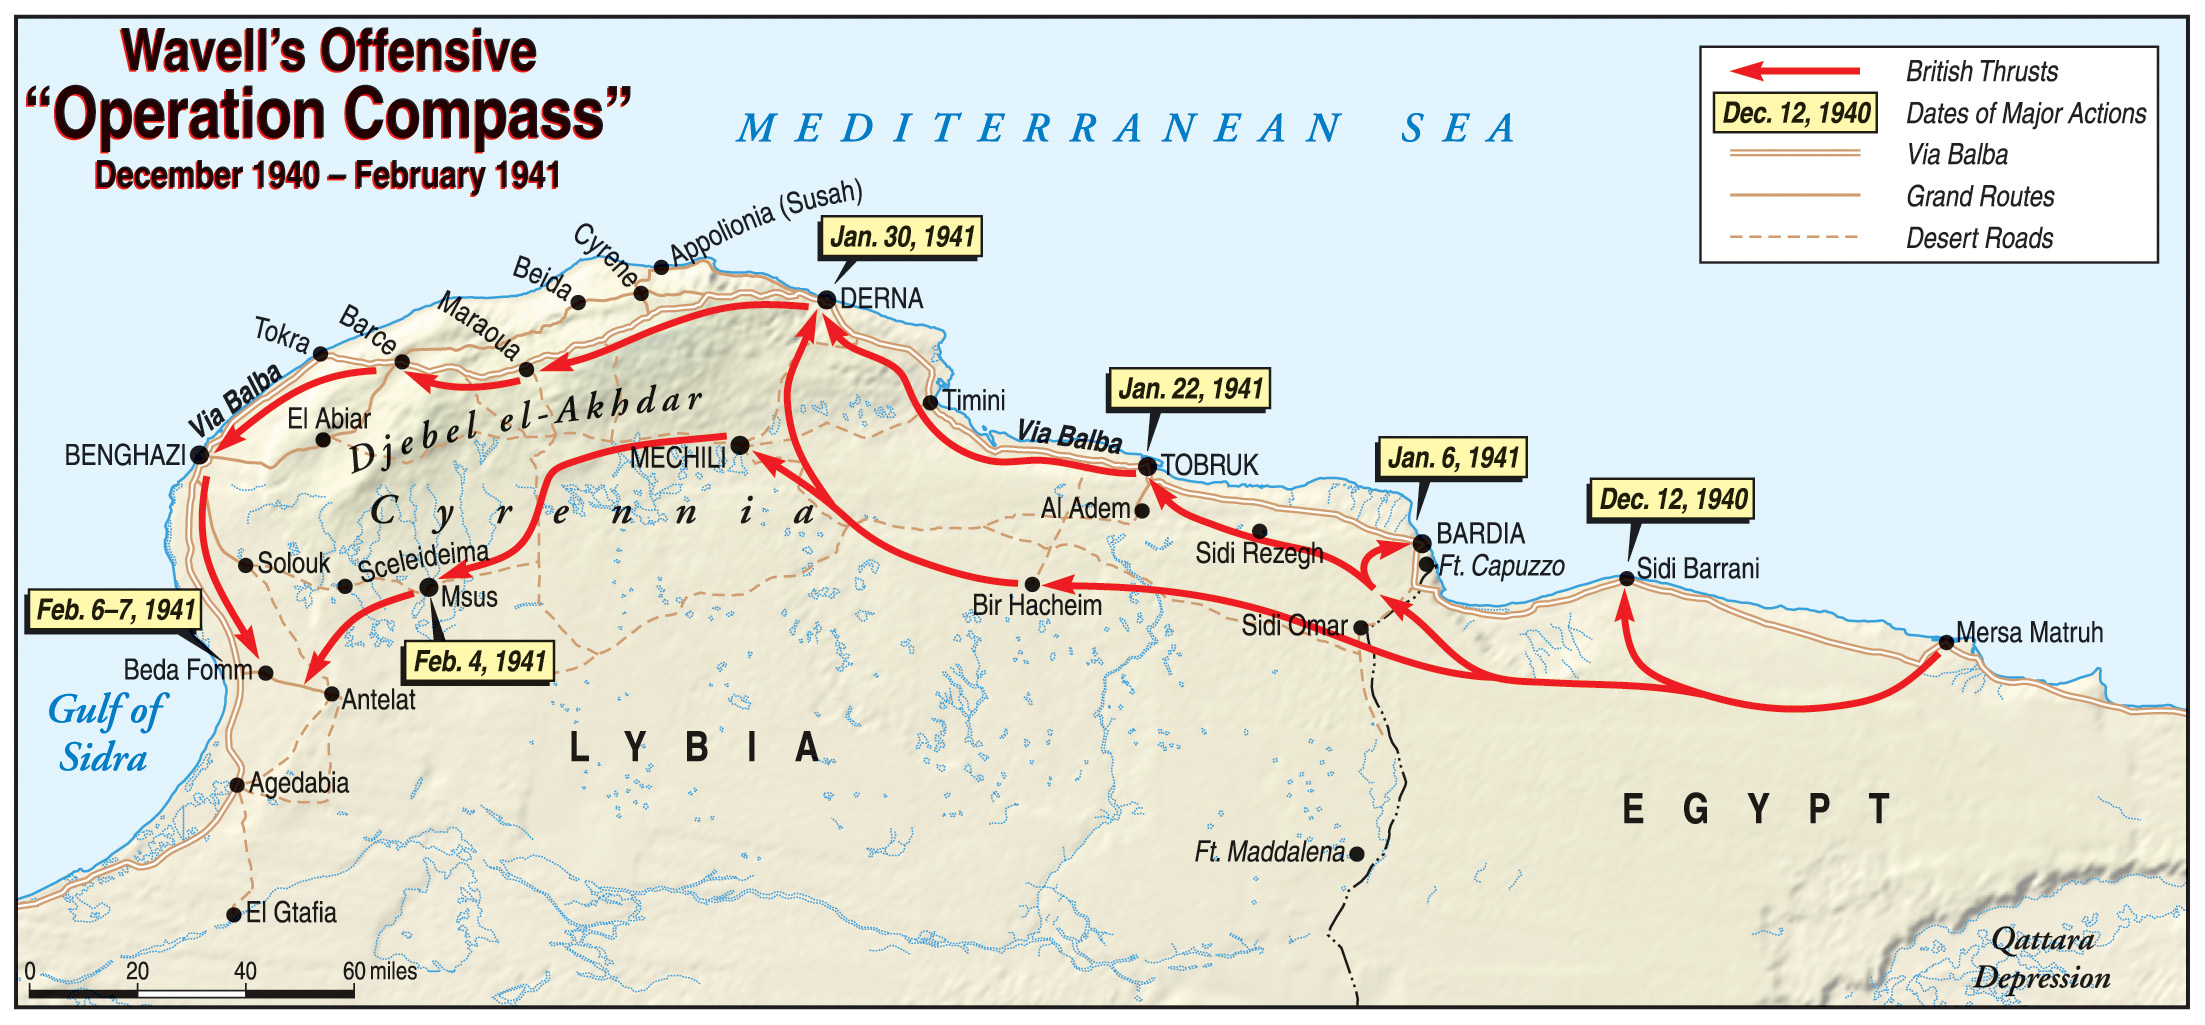 Directed by Field Marshal Archibald Wavell, Operation Compass was a huge success as two British divisions and an attached tank regiment eliminated an Italian threat to Egypt, assumed the offensive in Libya, and drove their enemy westward across miles of desert along the Mediterranean coast.